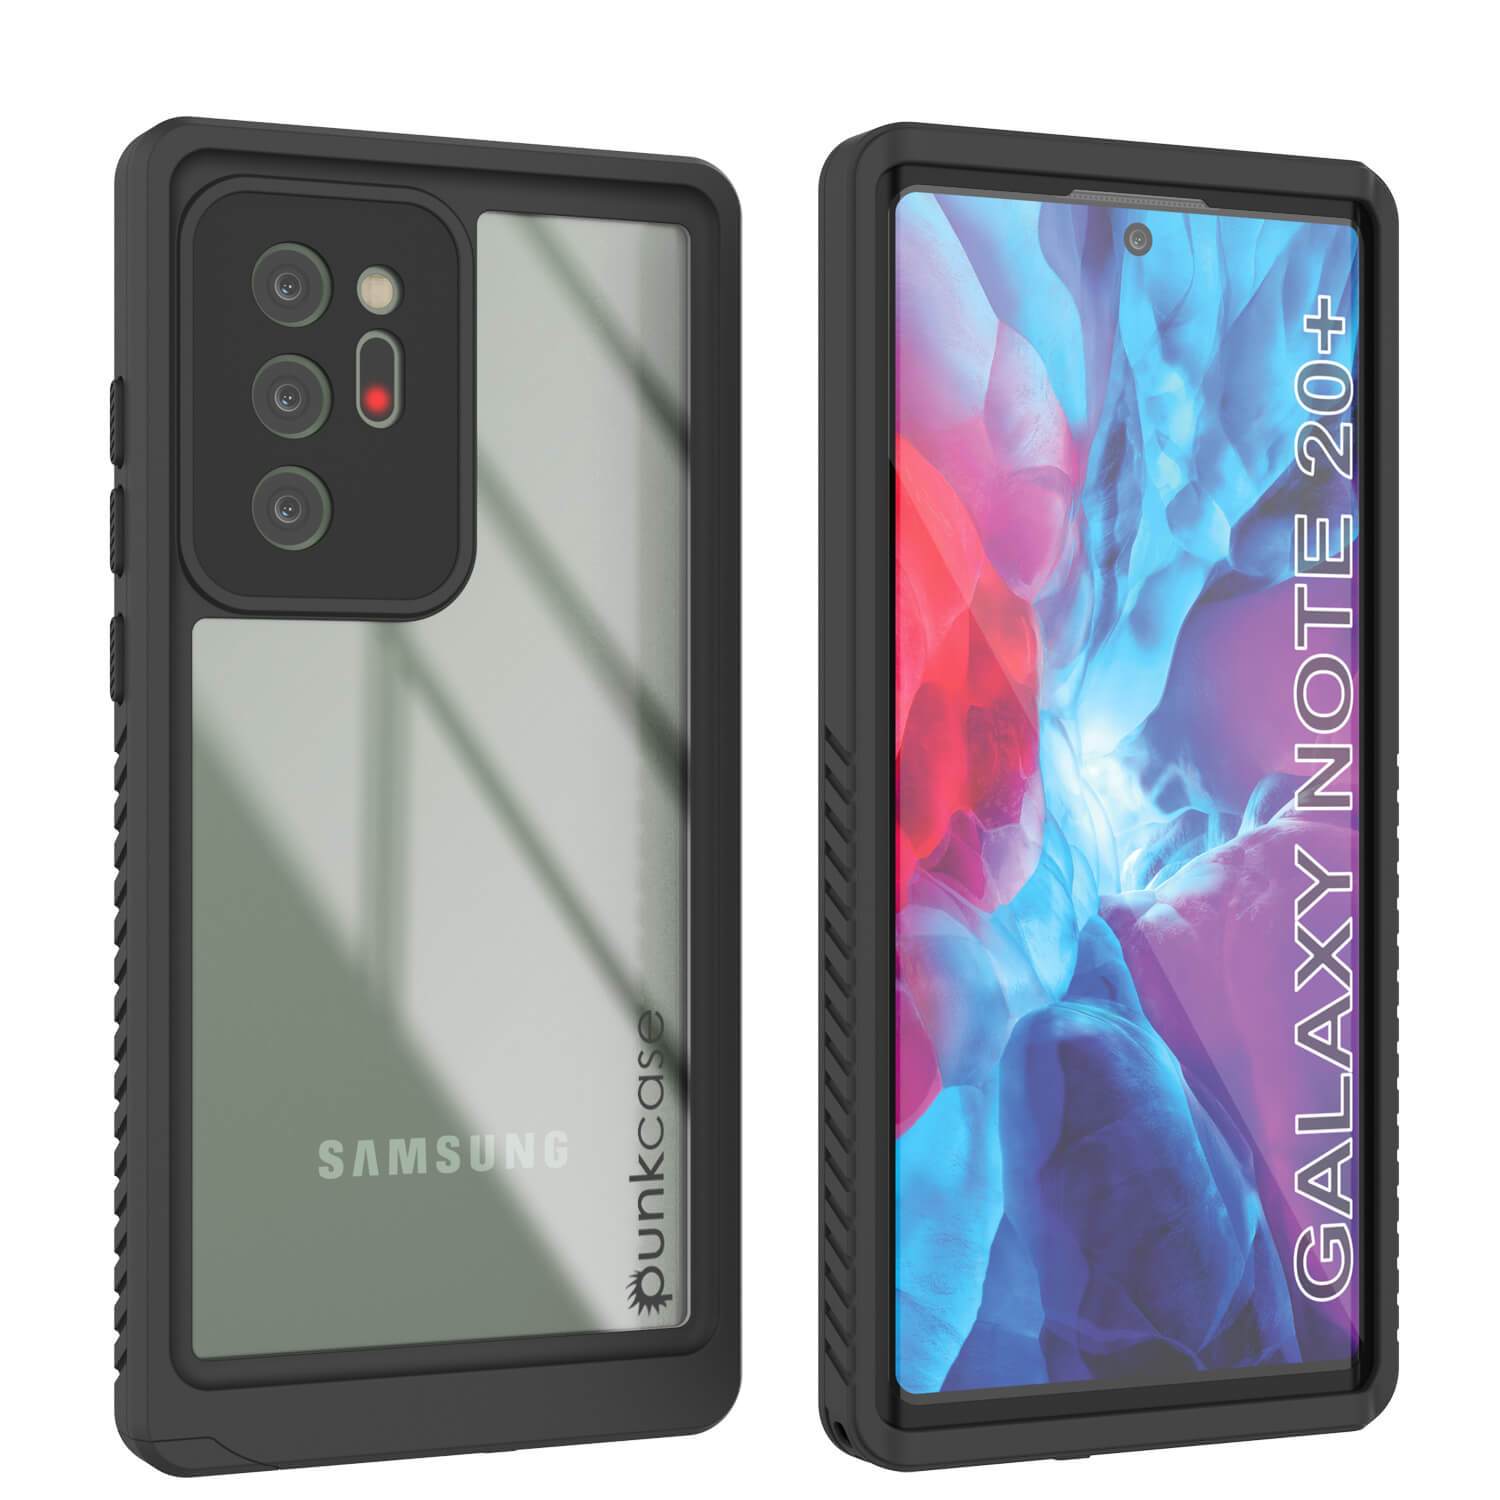 Galaxy Note 20 Ultra Case, Punkcase [Extreme Series] Armor Cover W/ Built In Screen Protector [Clear]